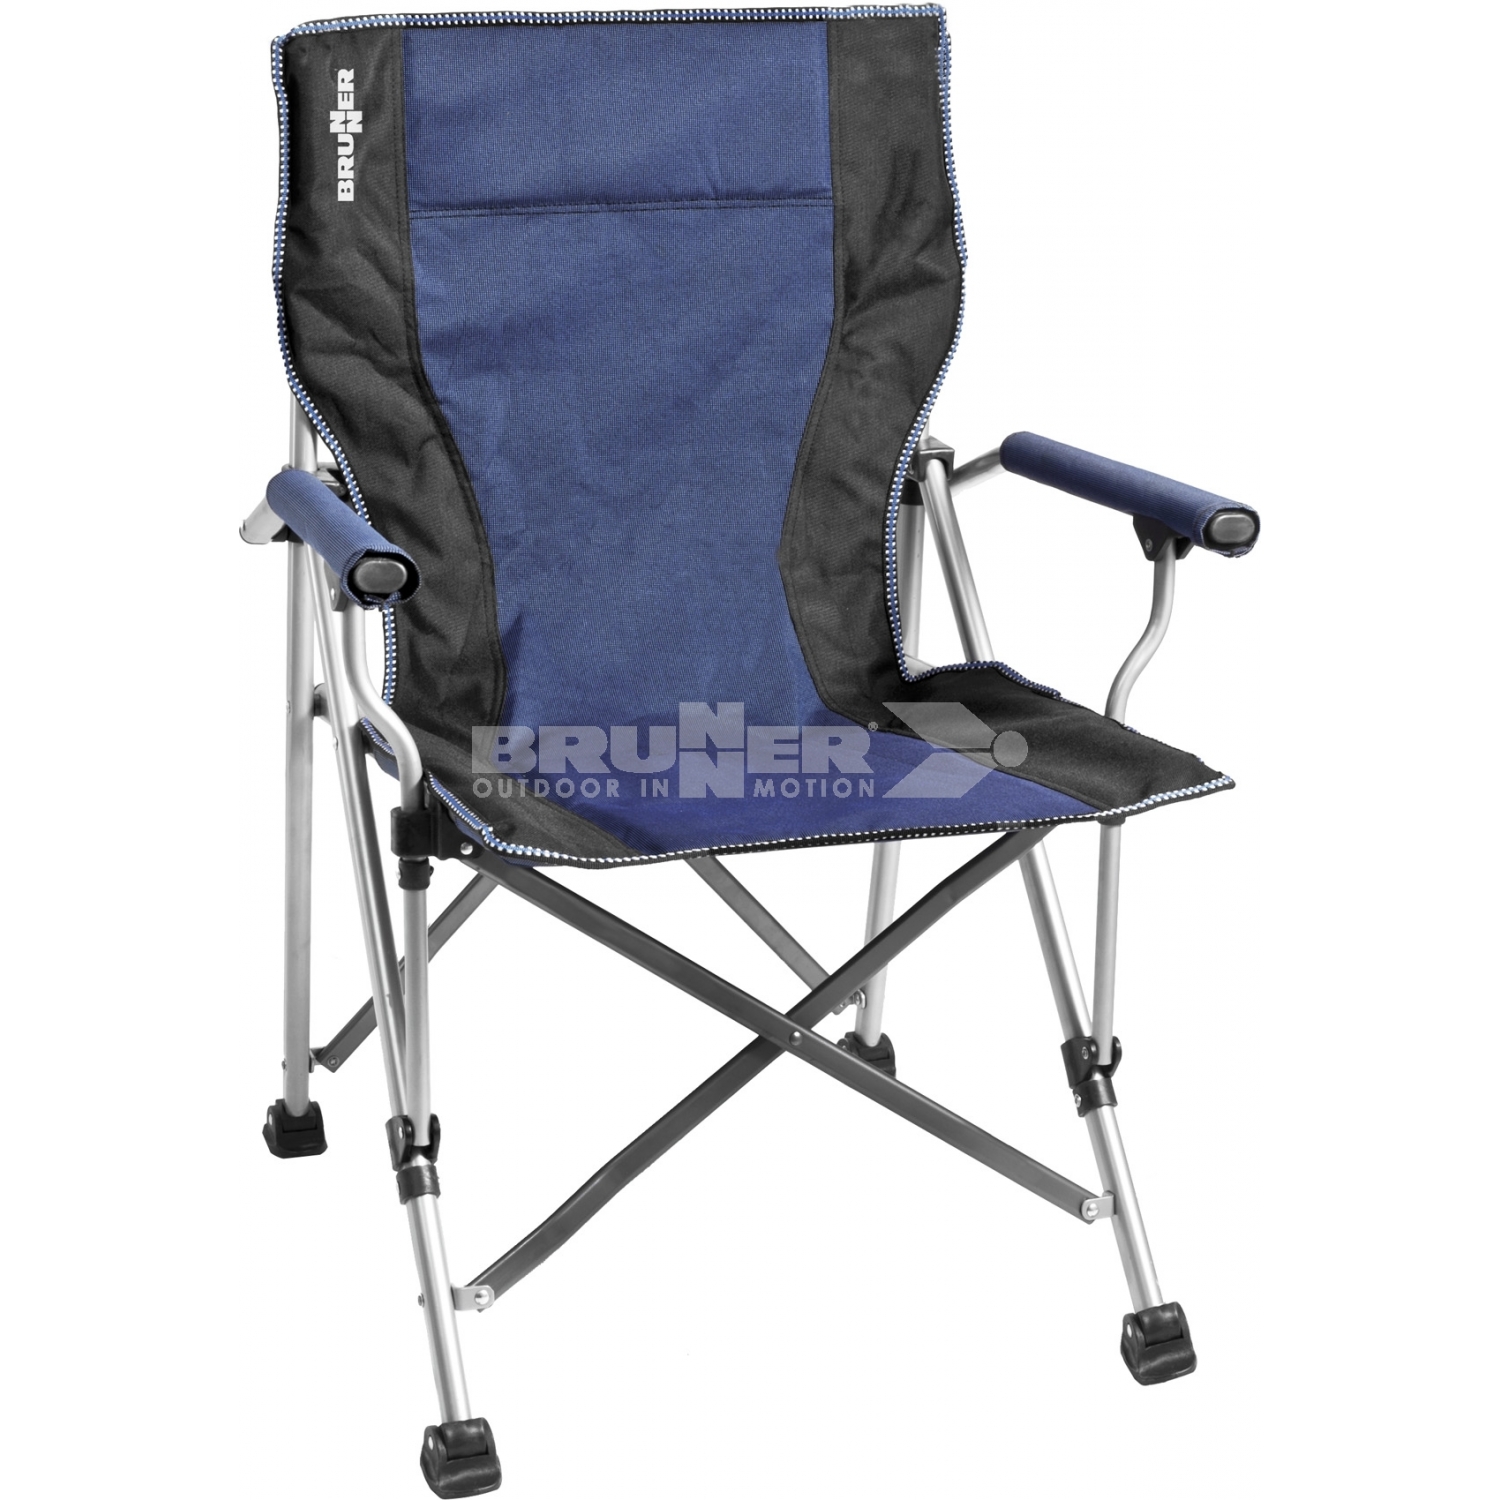 Brunner Raptor Classic Leisure Camping Chair